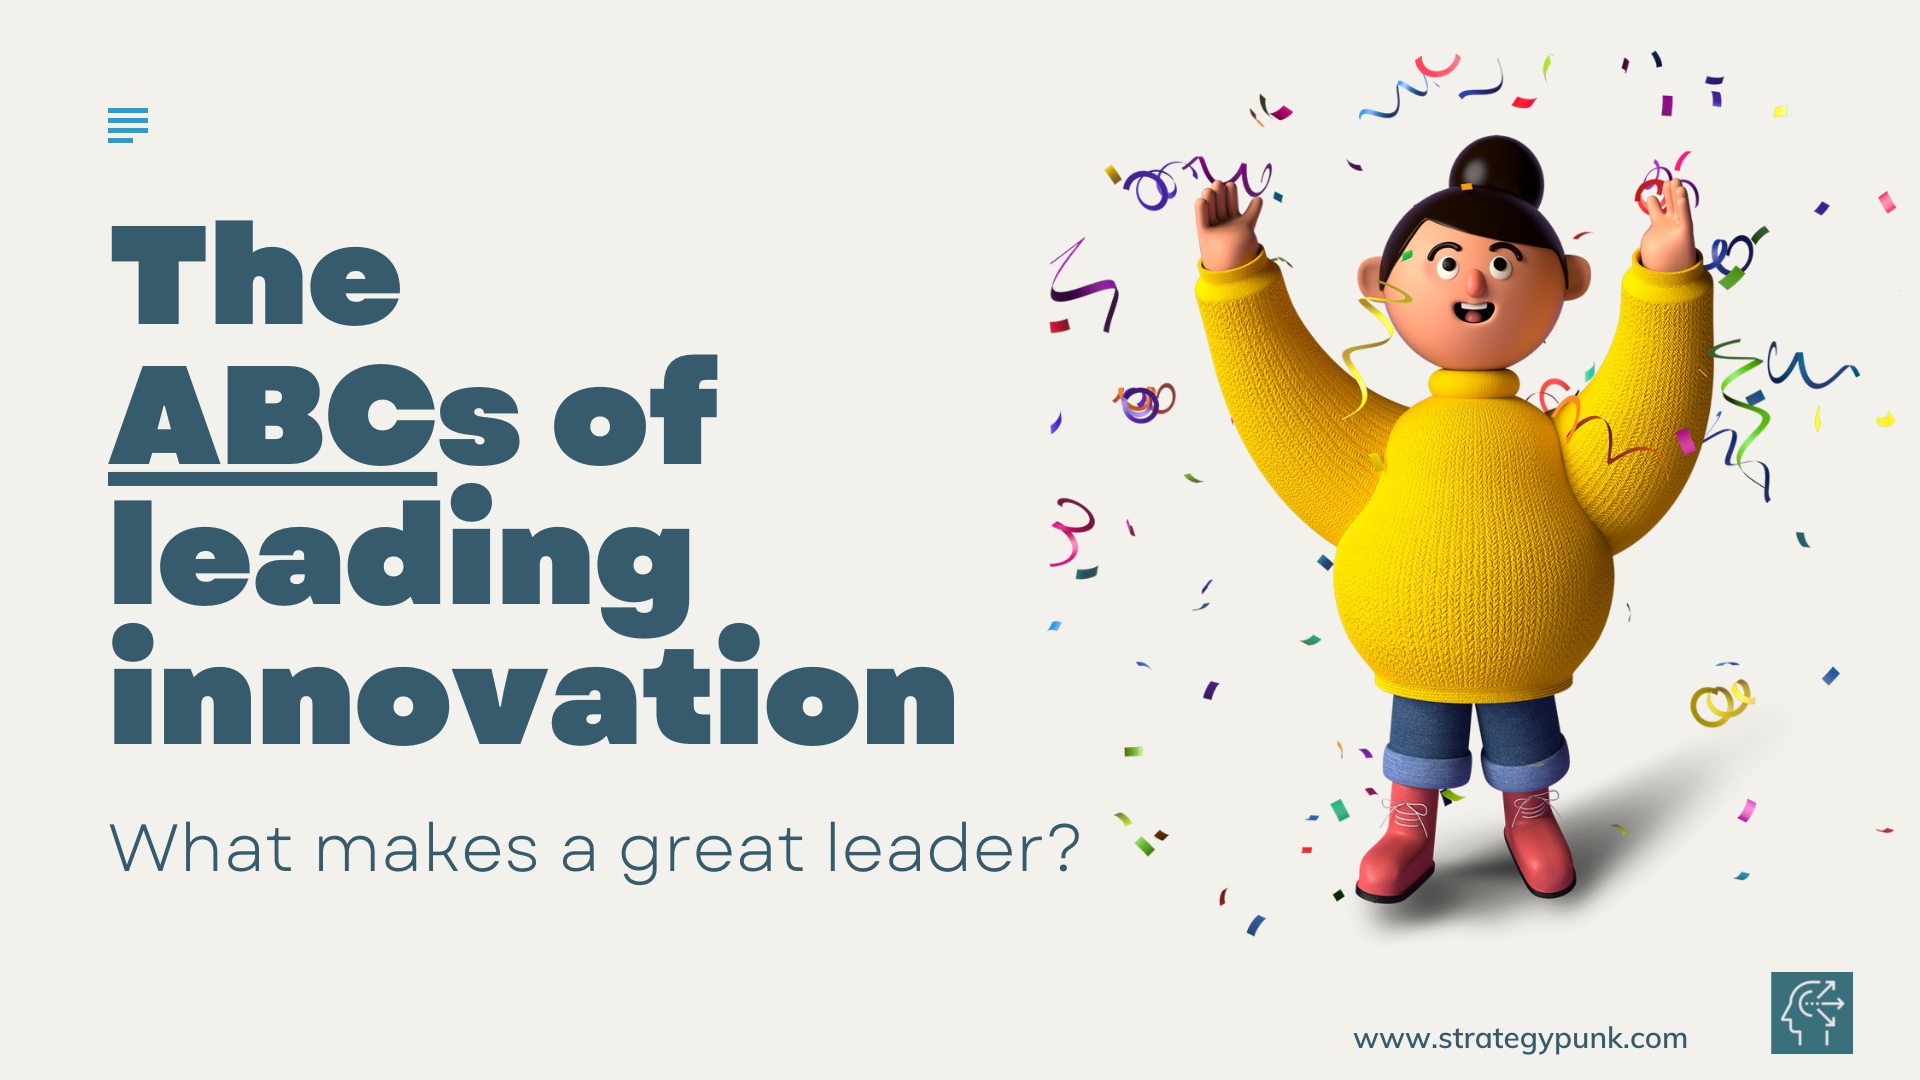 What makes a great leader? The HBR ABCs of leading innovation